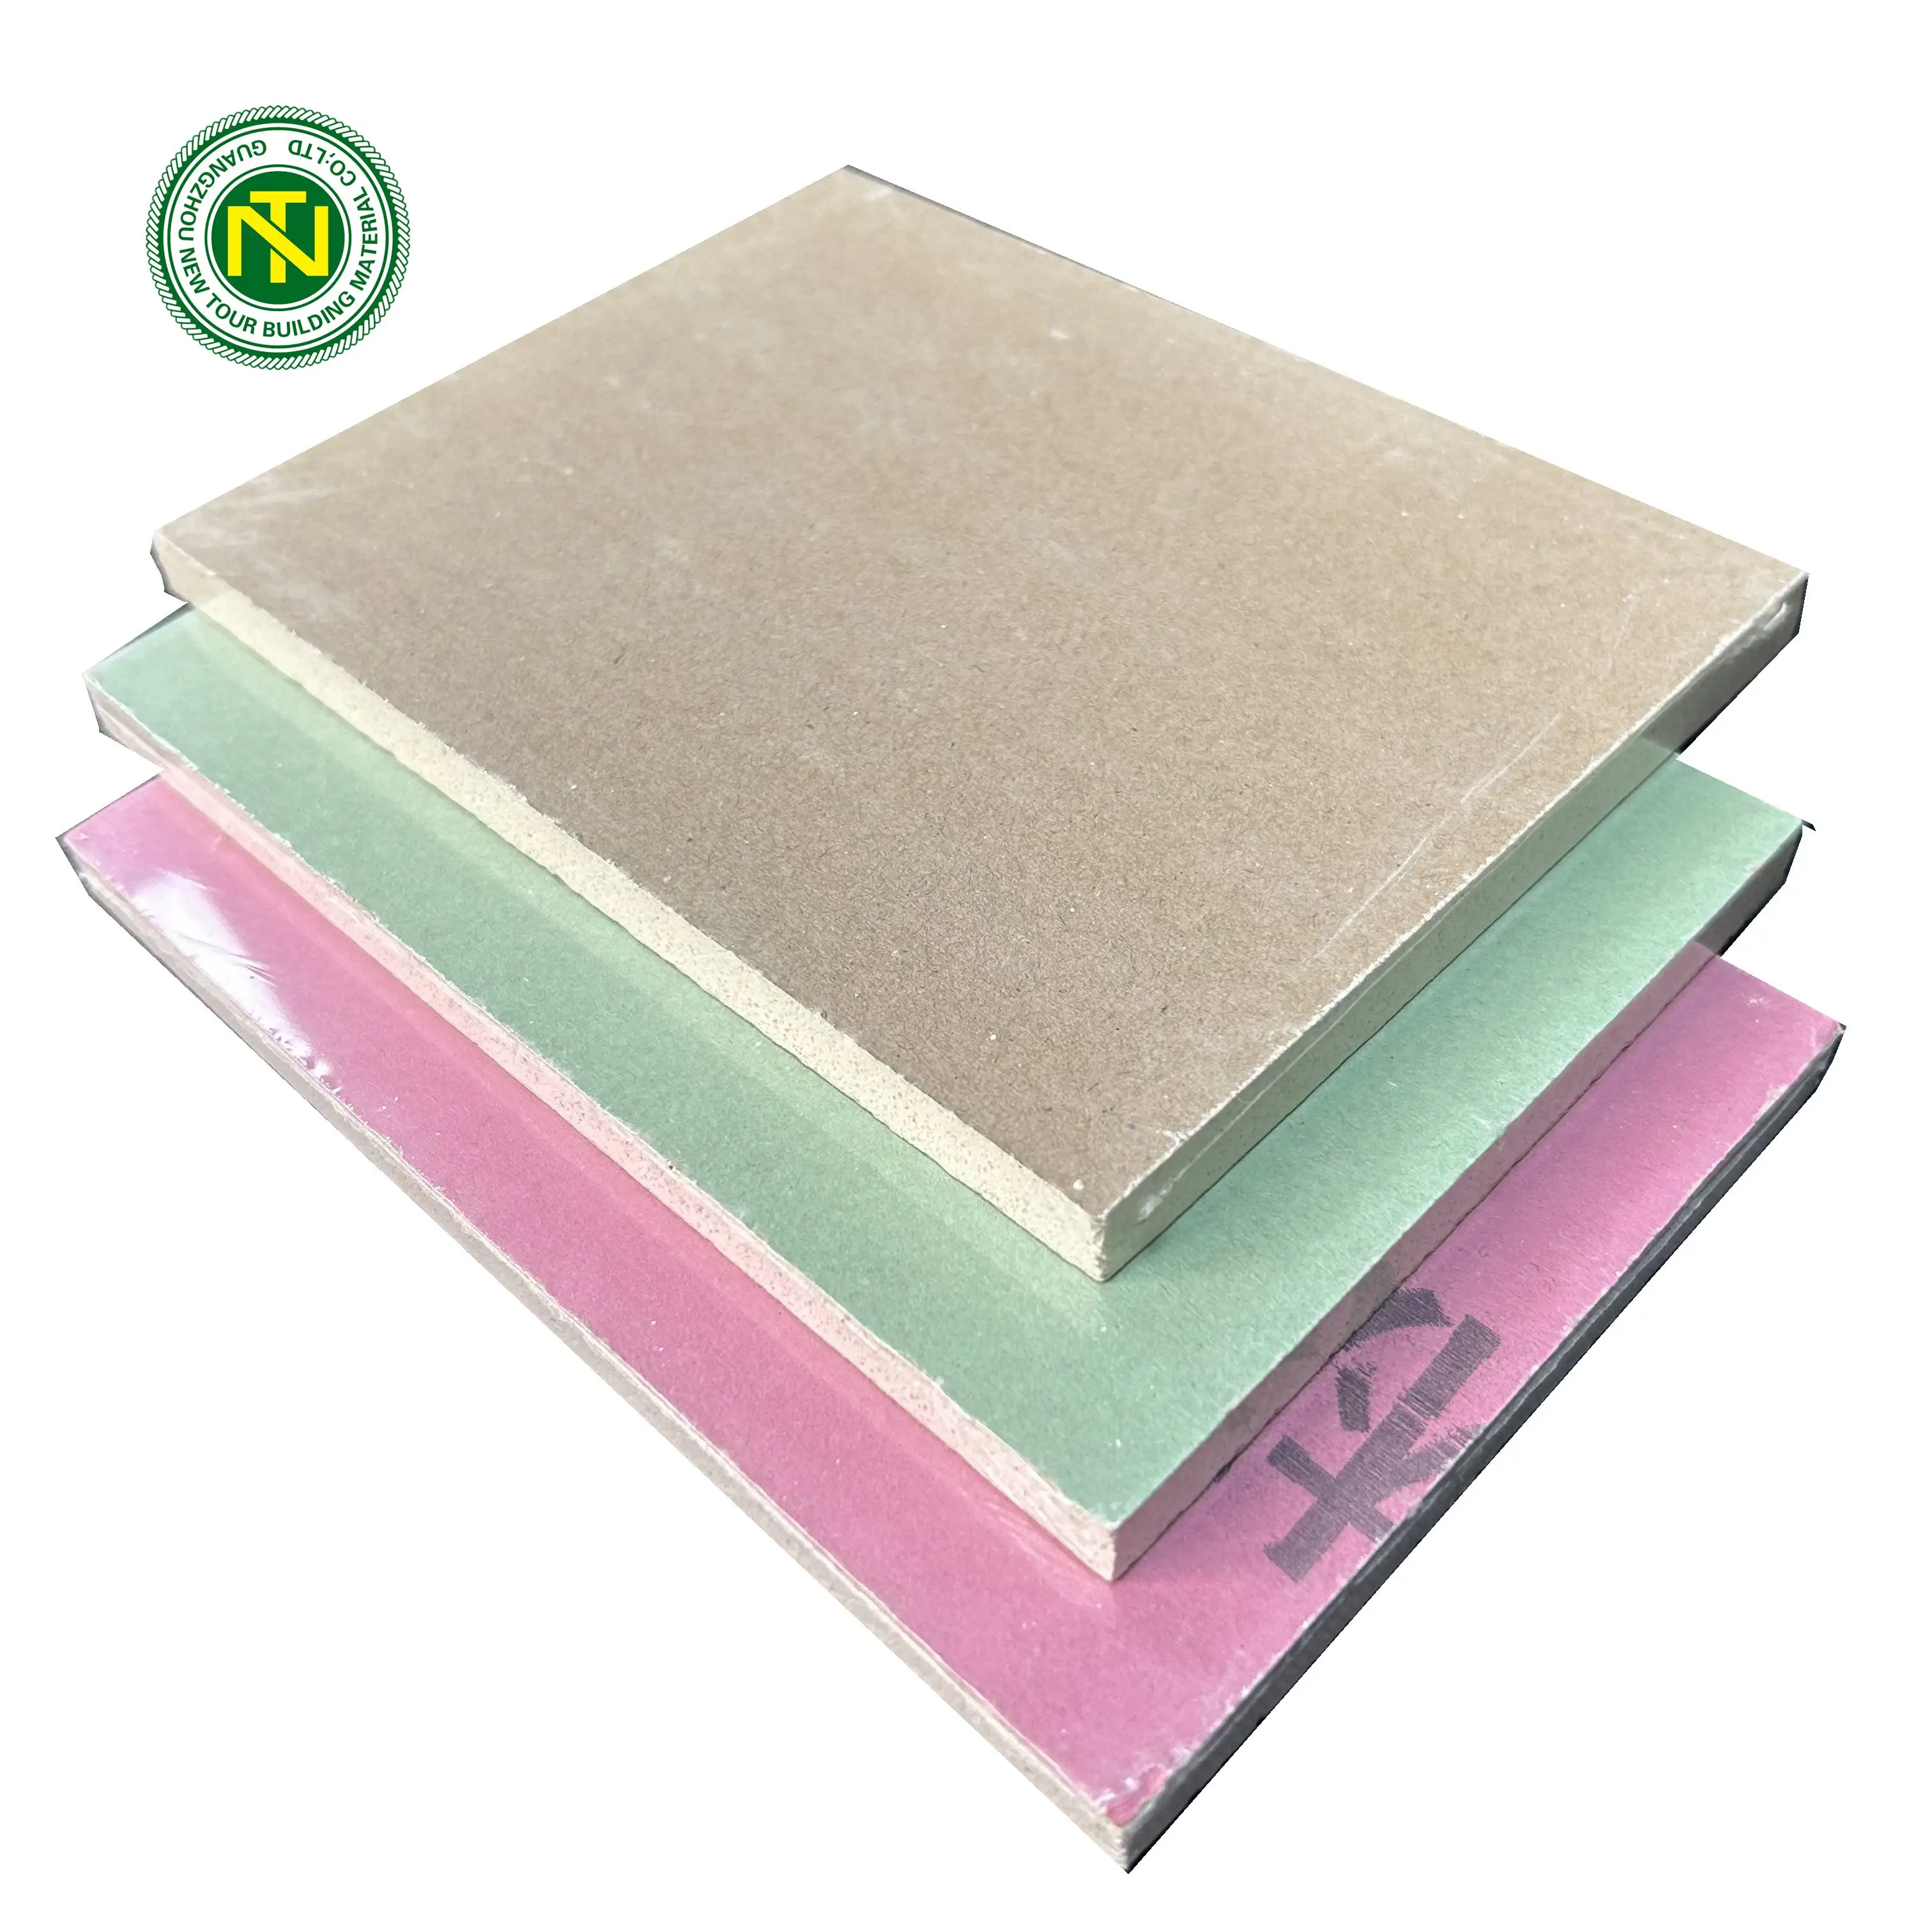 Plaster Fire and water proof gypsum board for hotel suspension ceiling and partition drywall ceiling tile nice price